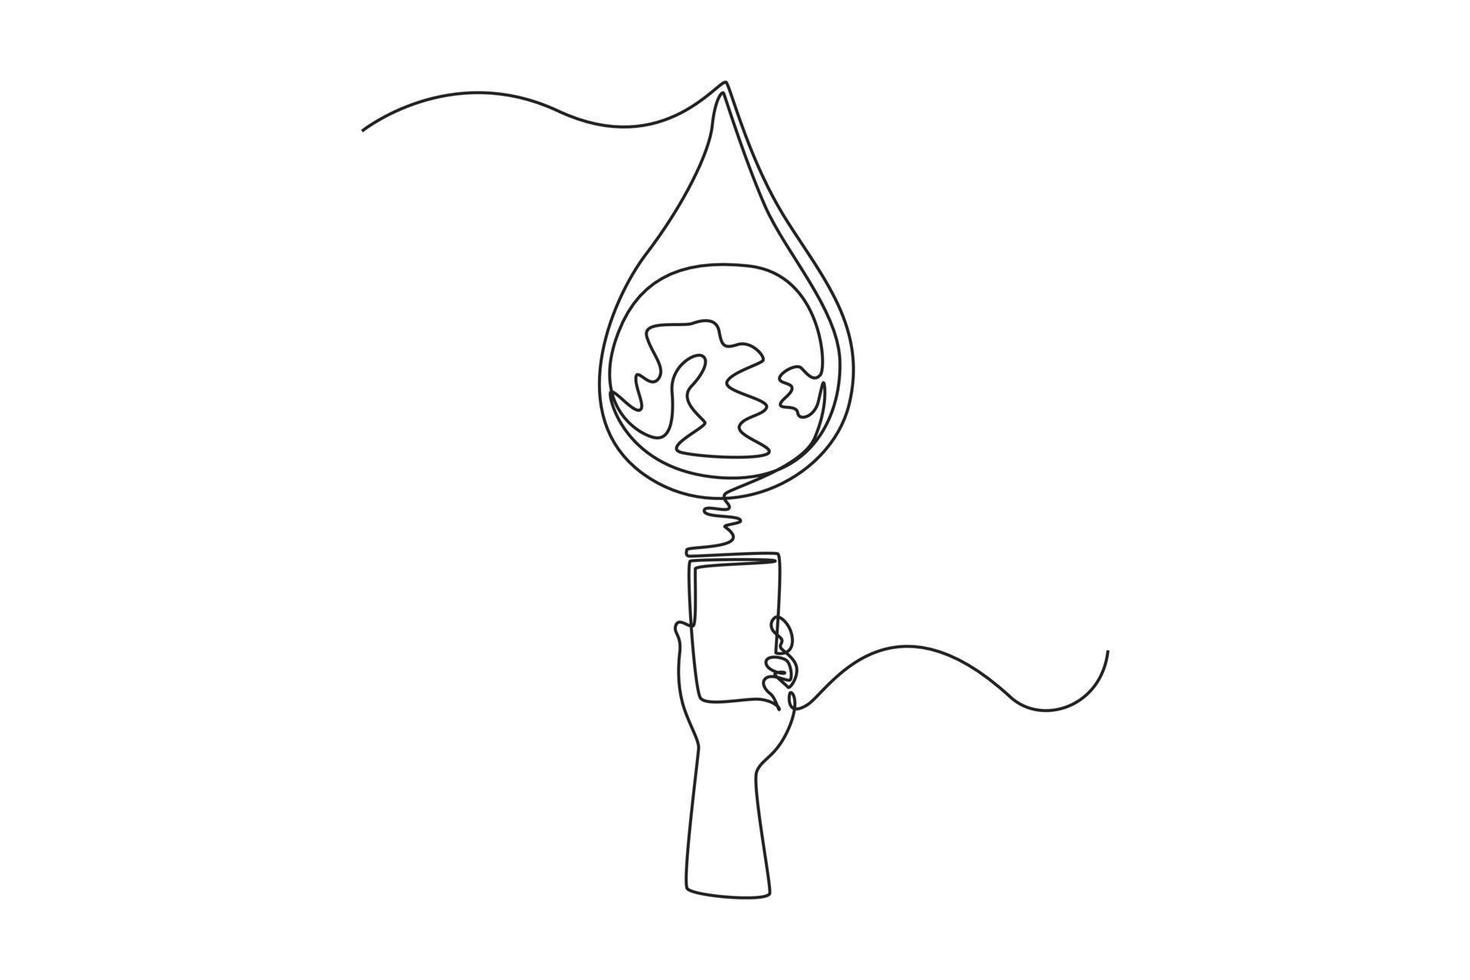 Continuous one line drawing water drop on glass of water. World water day concept. Single line draw design vector graphic illustration.